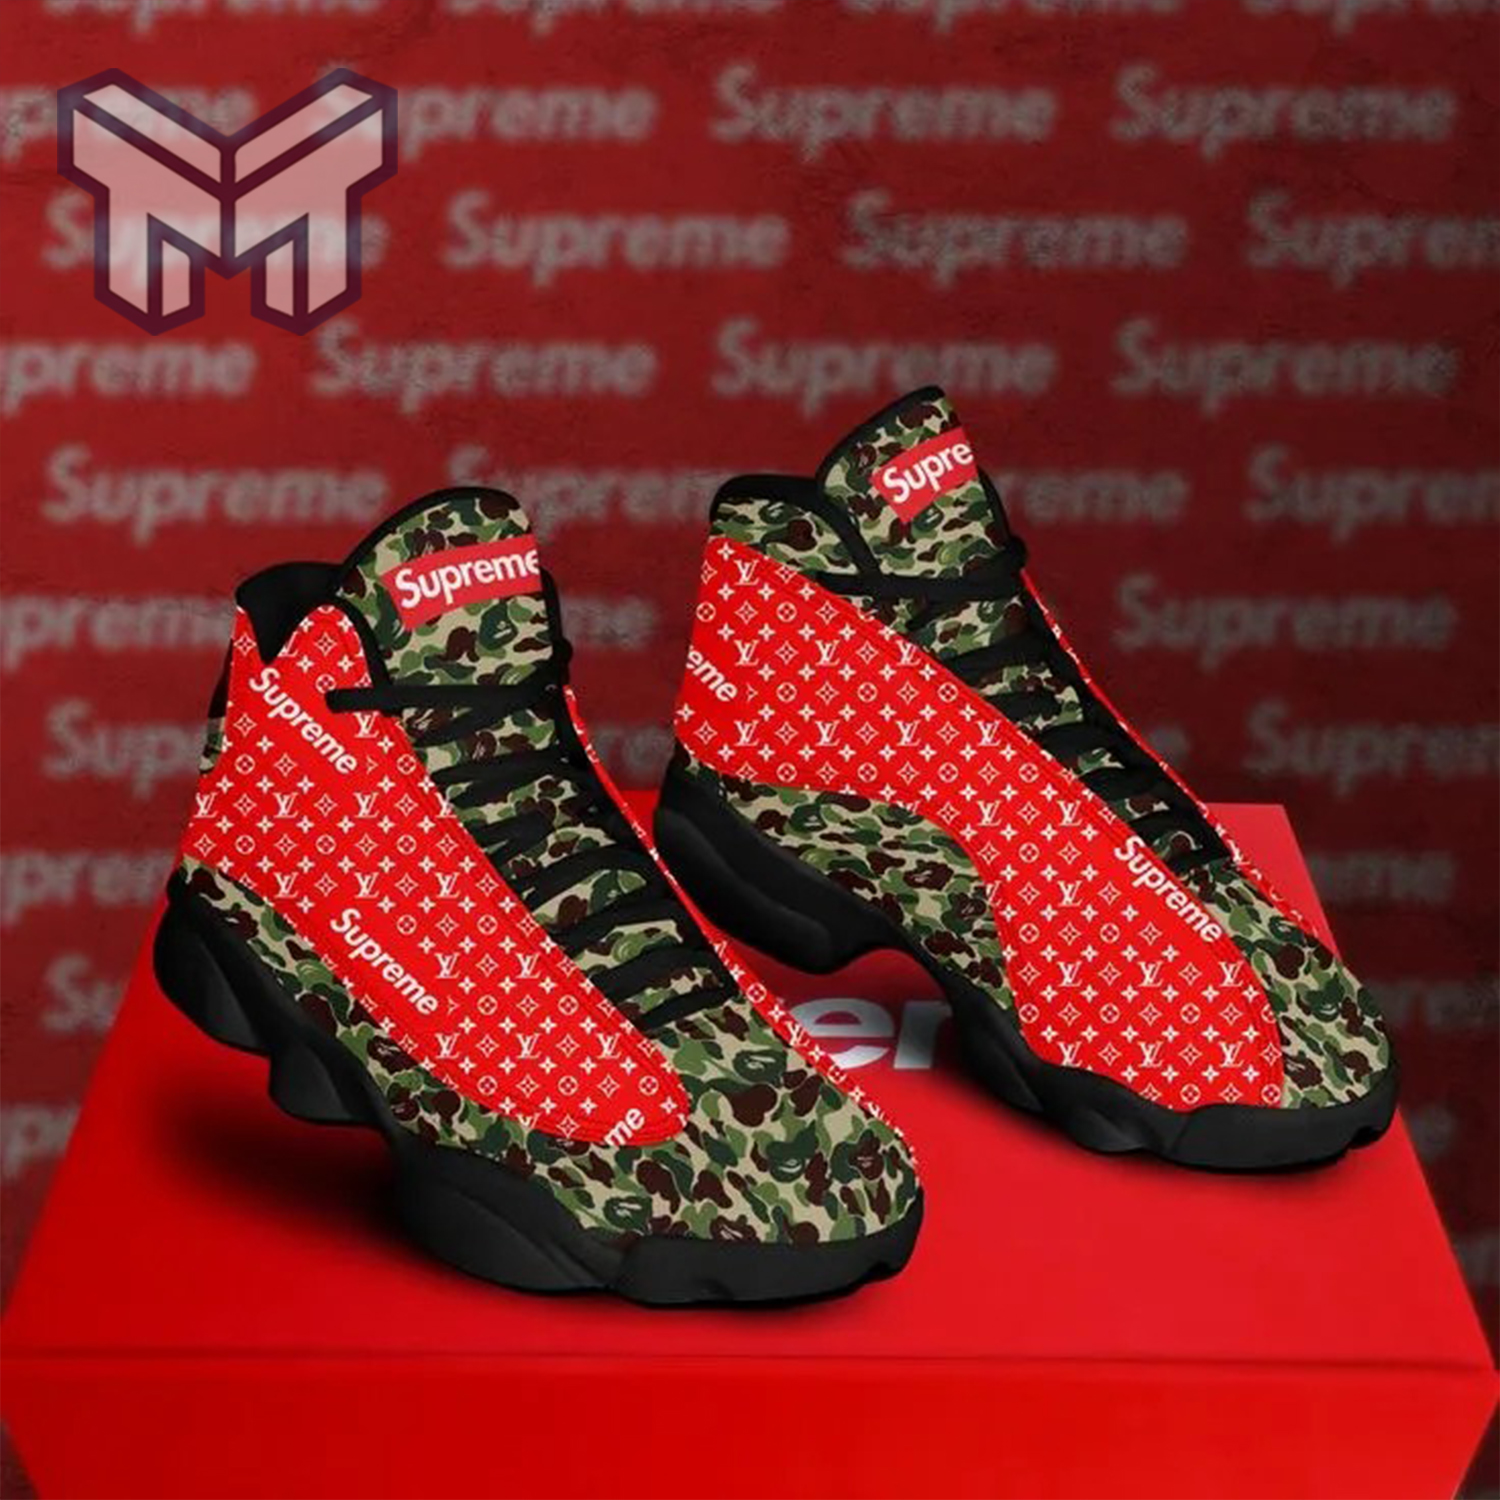 Louis vuitton lv x supreme air jordan 13 sneakers shoes gifts for